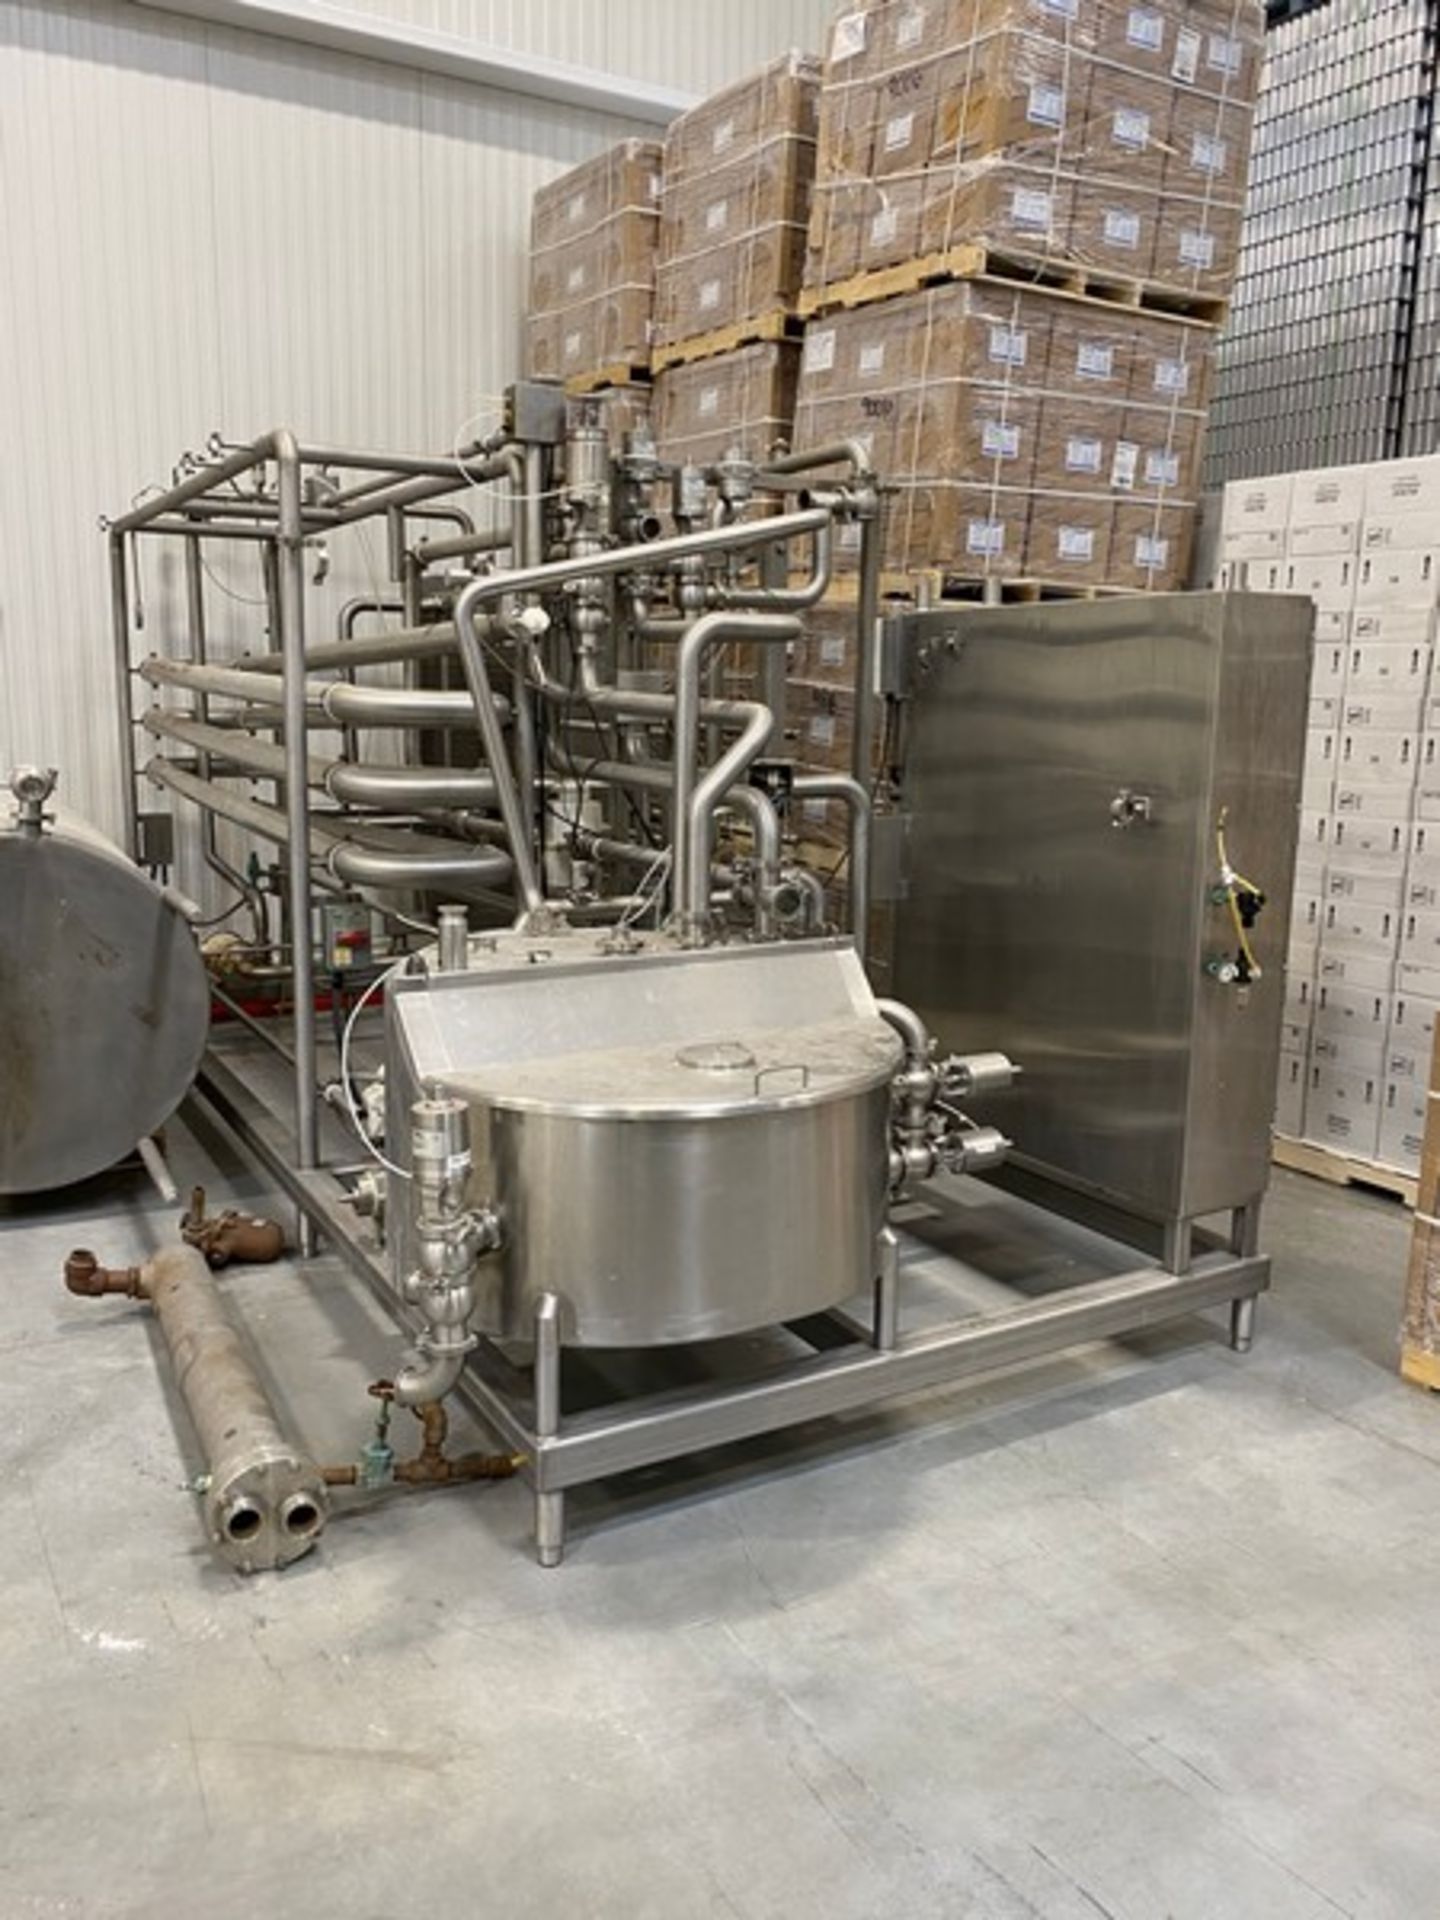 CFR 80,000 lbs. per hour HTST Skidded Pasteurizer with 4" Holding Tubes (Load Fee $1,000) (Located